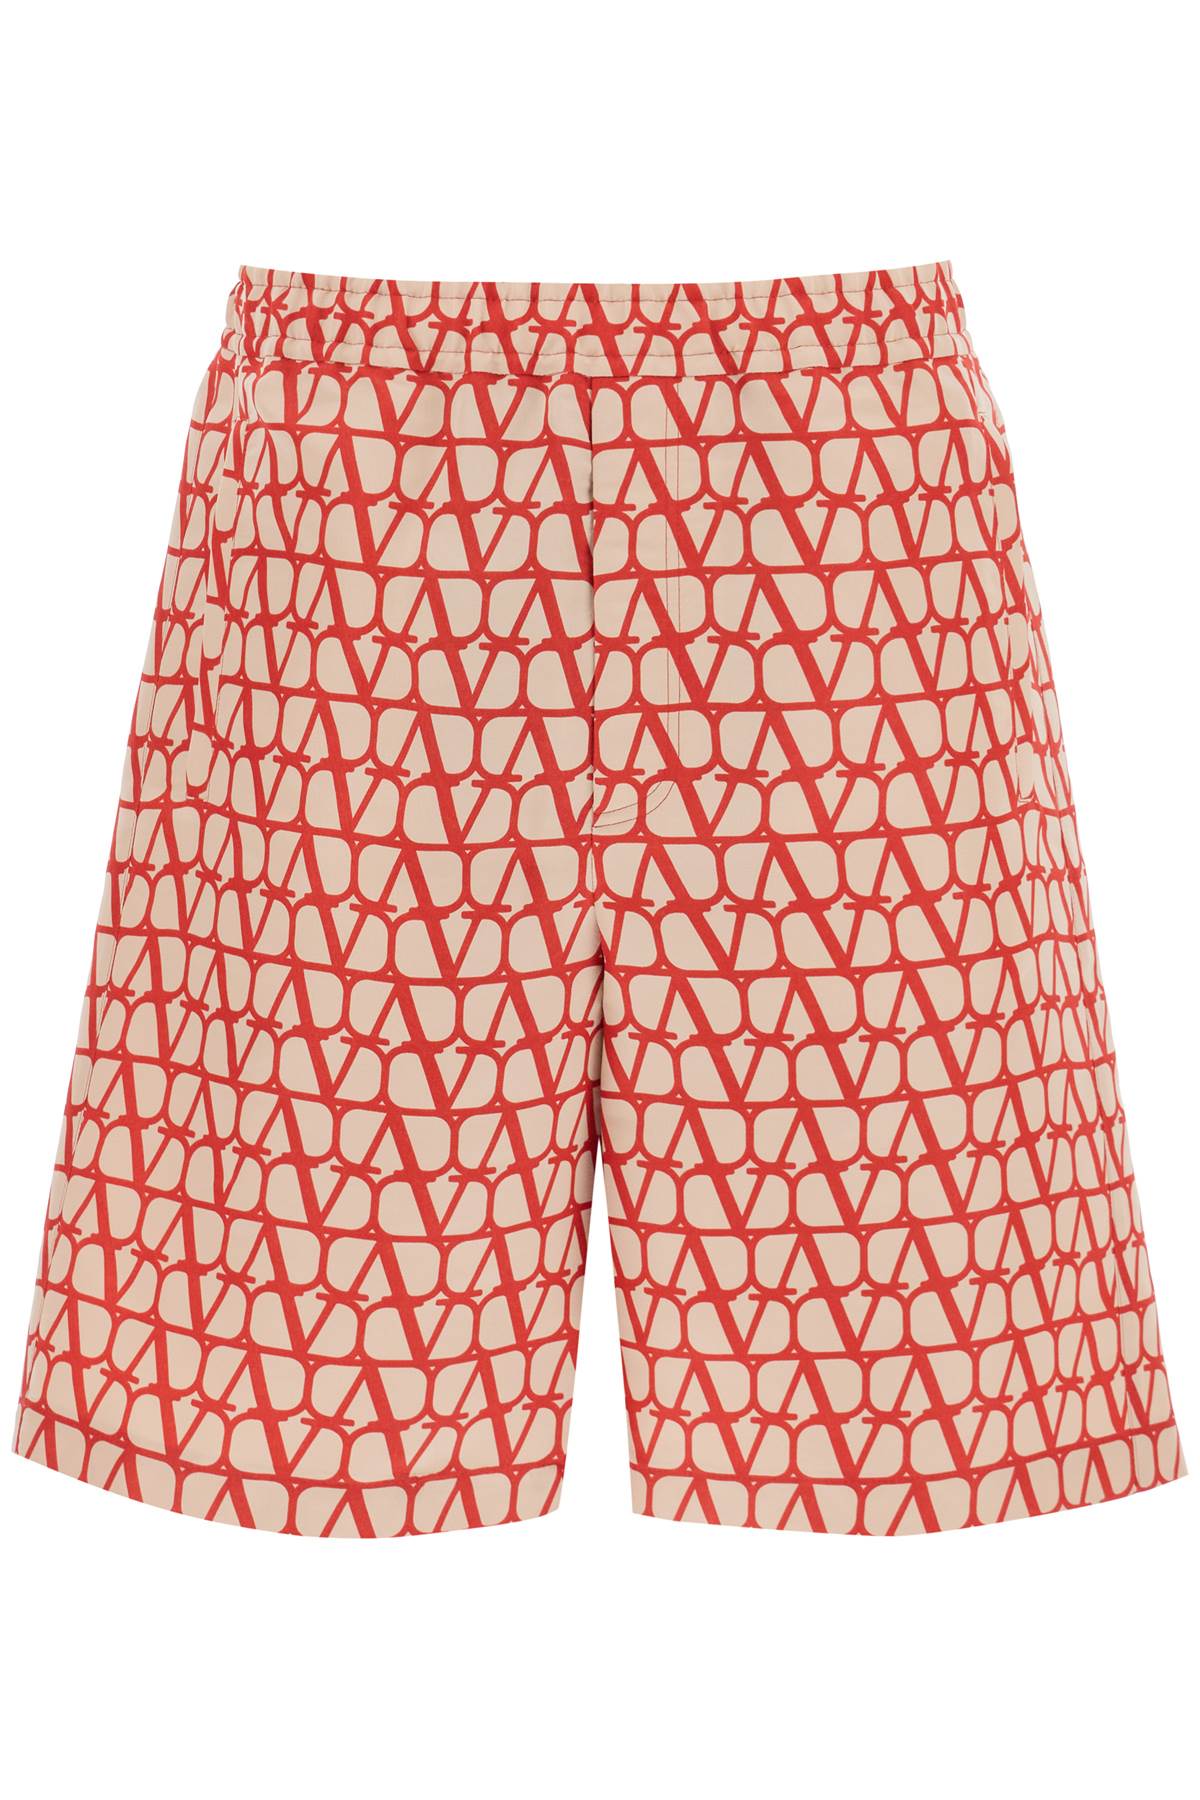 Valentino shorts in silk faille with toile iconographe motif 2V0RDK219D0 ST TOILE ICONOGRAPH BEIGE ROSSO